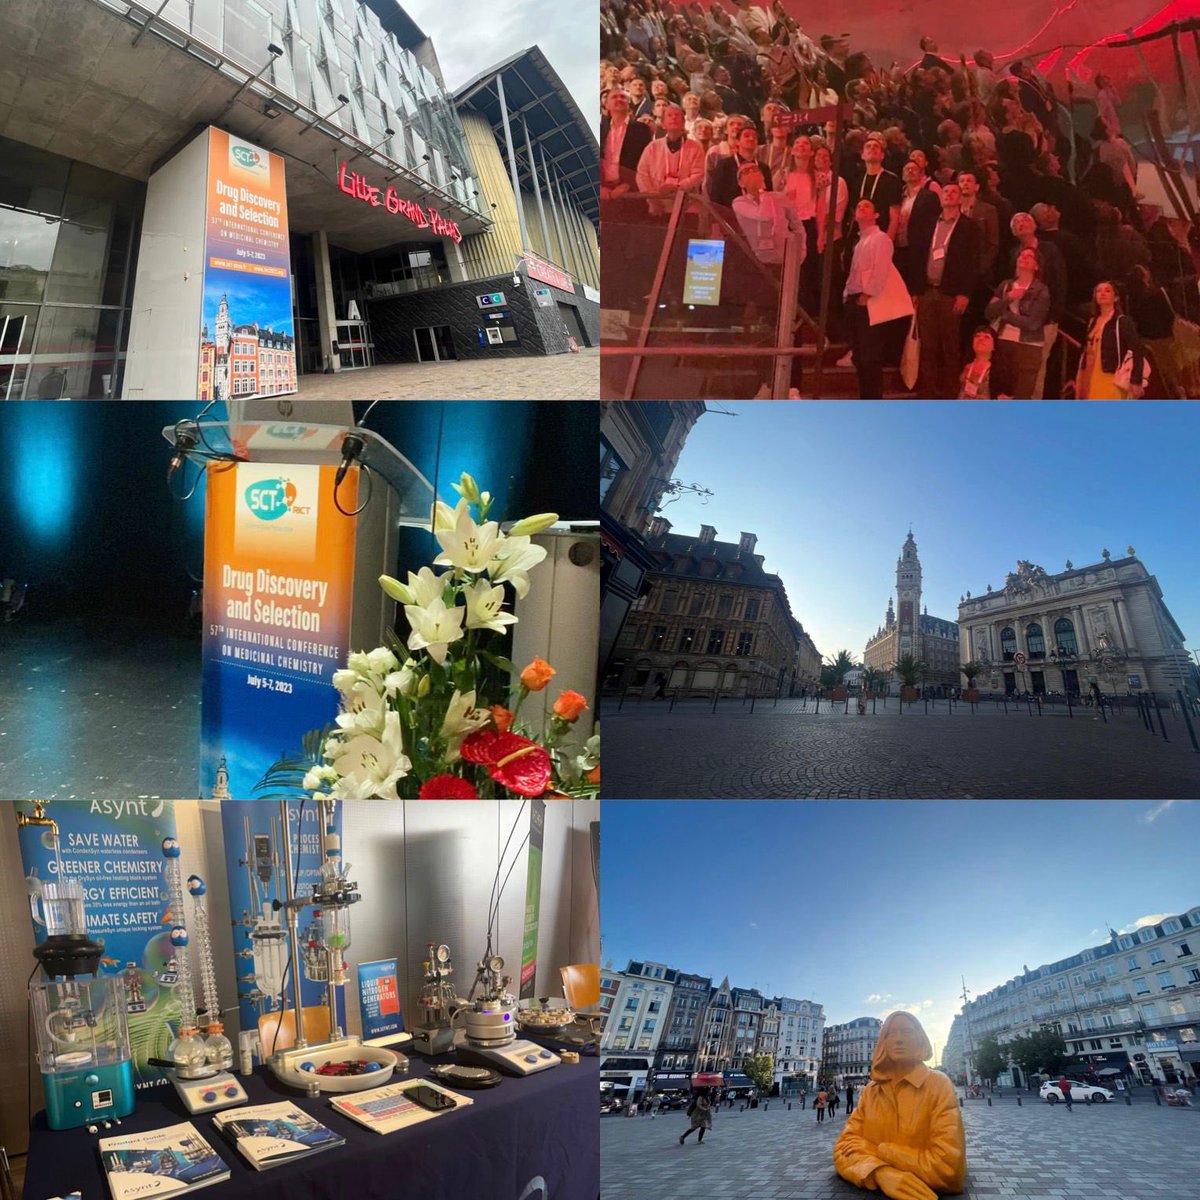 I am grateful that I had attended and participated in the 57th International Conference on Medicinal Chemistry (RICT 2023) in Lille, France and visiting nice places in North France 🇫🇷,  Belgium 🇧🇪 and Netherlands 🇳🇱. #RICT2023 #DrugDiscovery #MedicinalChemistry #Lille  @Asynt